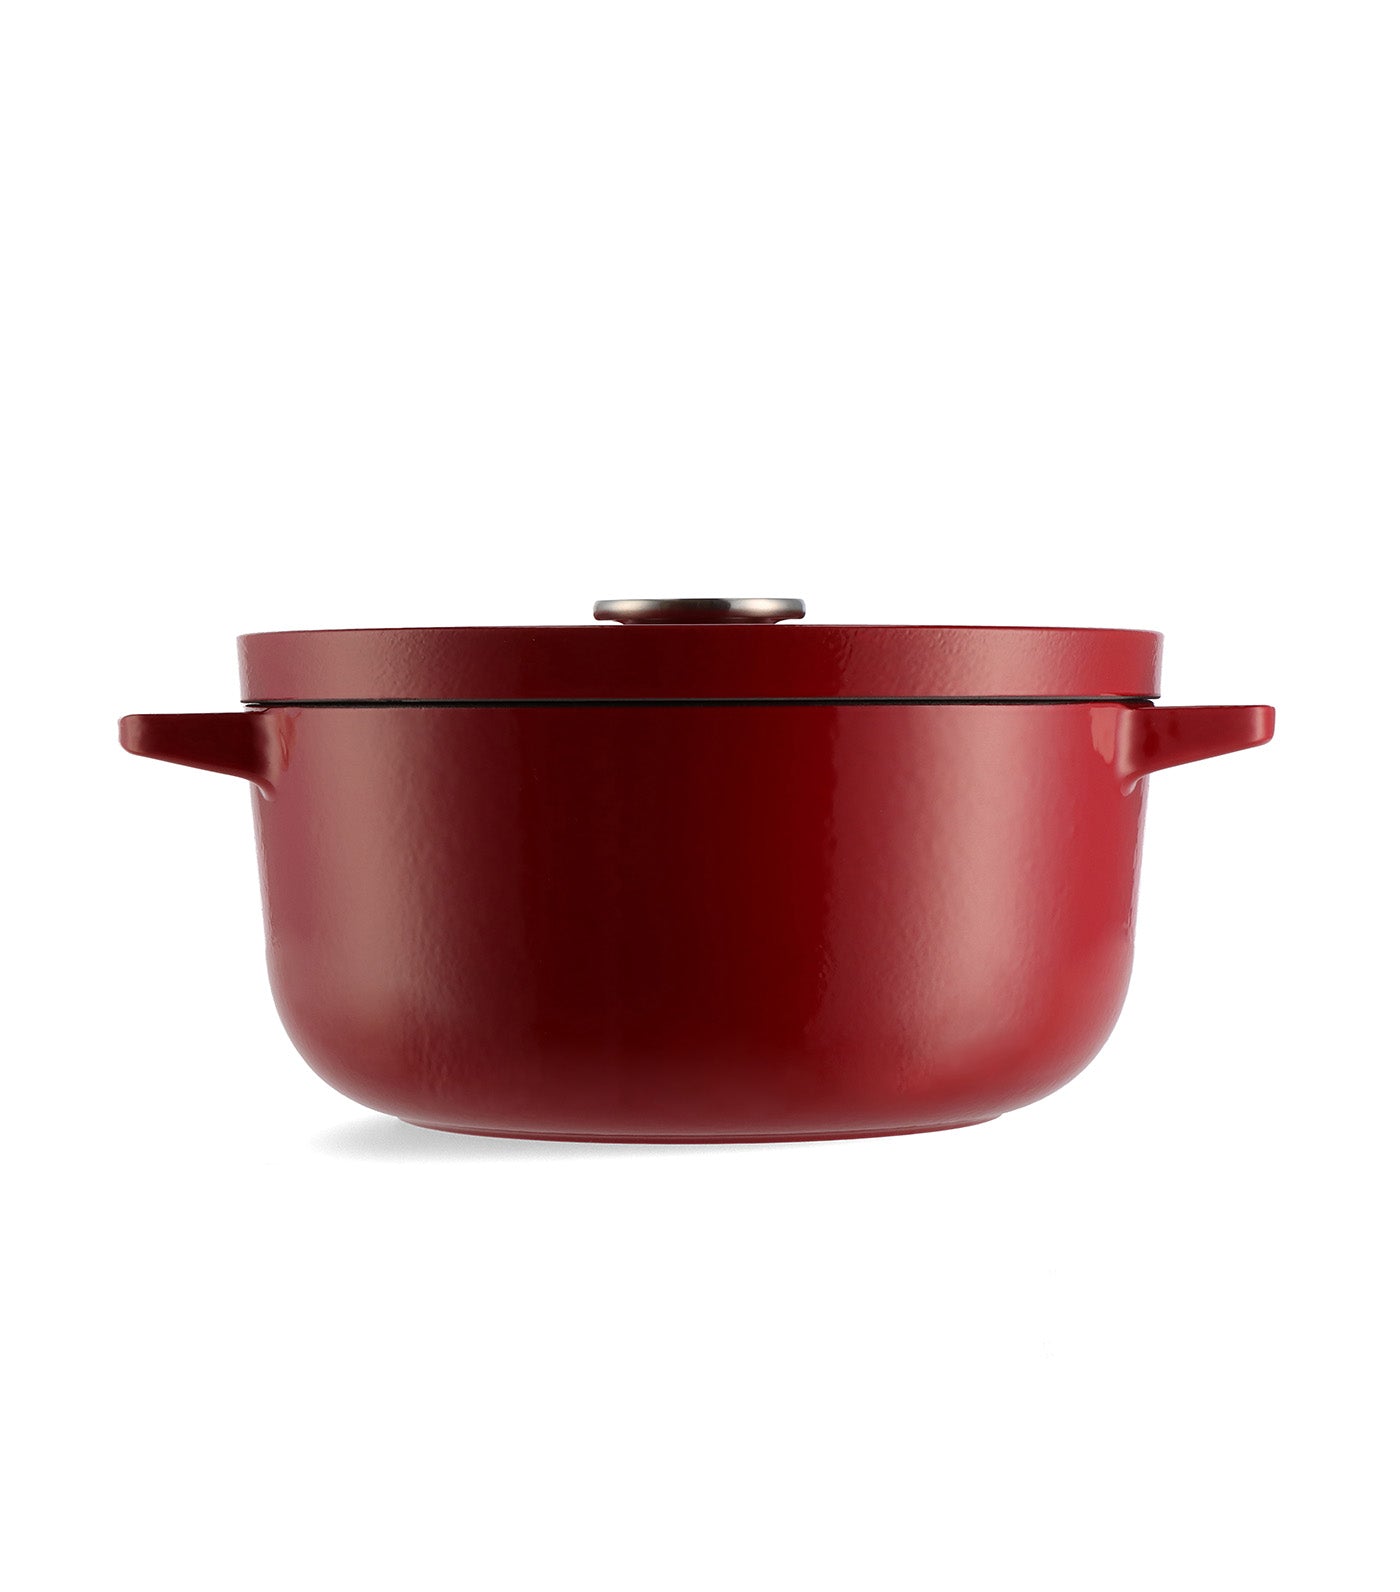 KitchenAid Cast Iron Casserole Empire Red with Lid